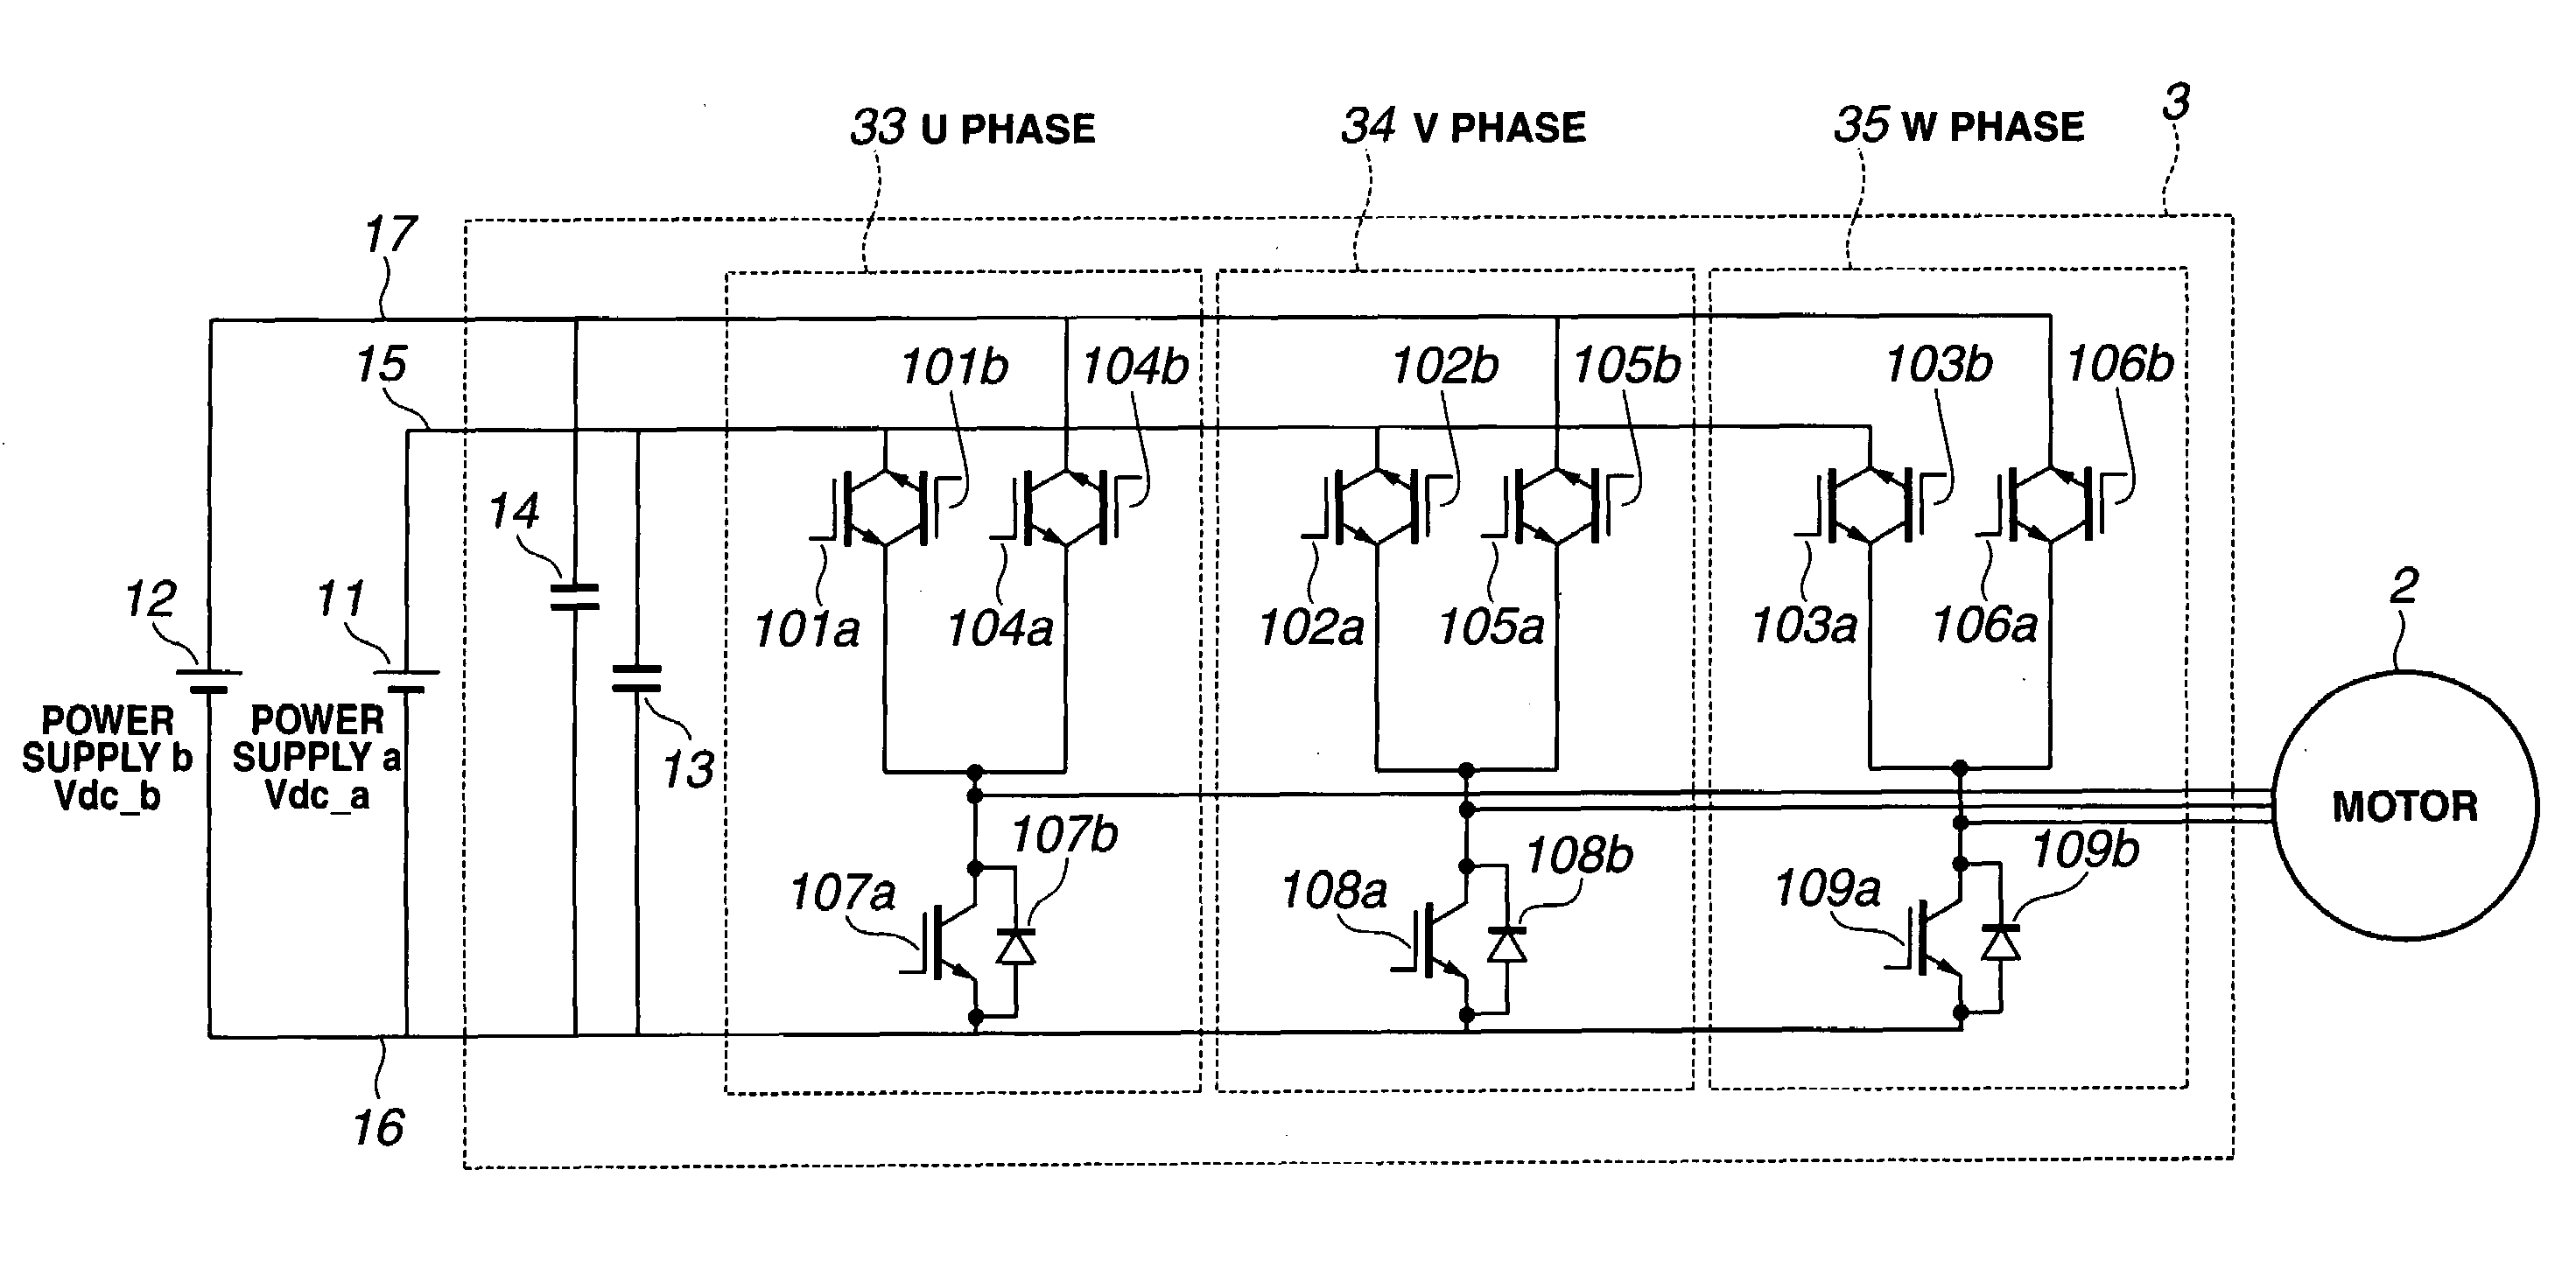 Electric power conversion apparatus for plural DC voltage sources and an AC electrical load